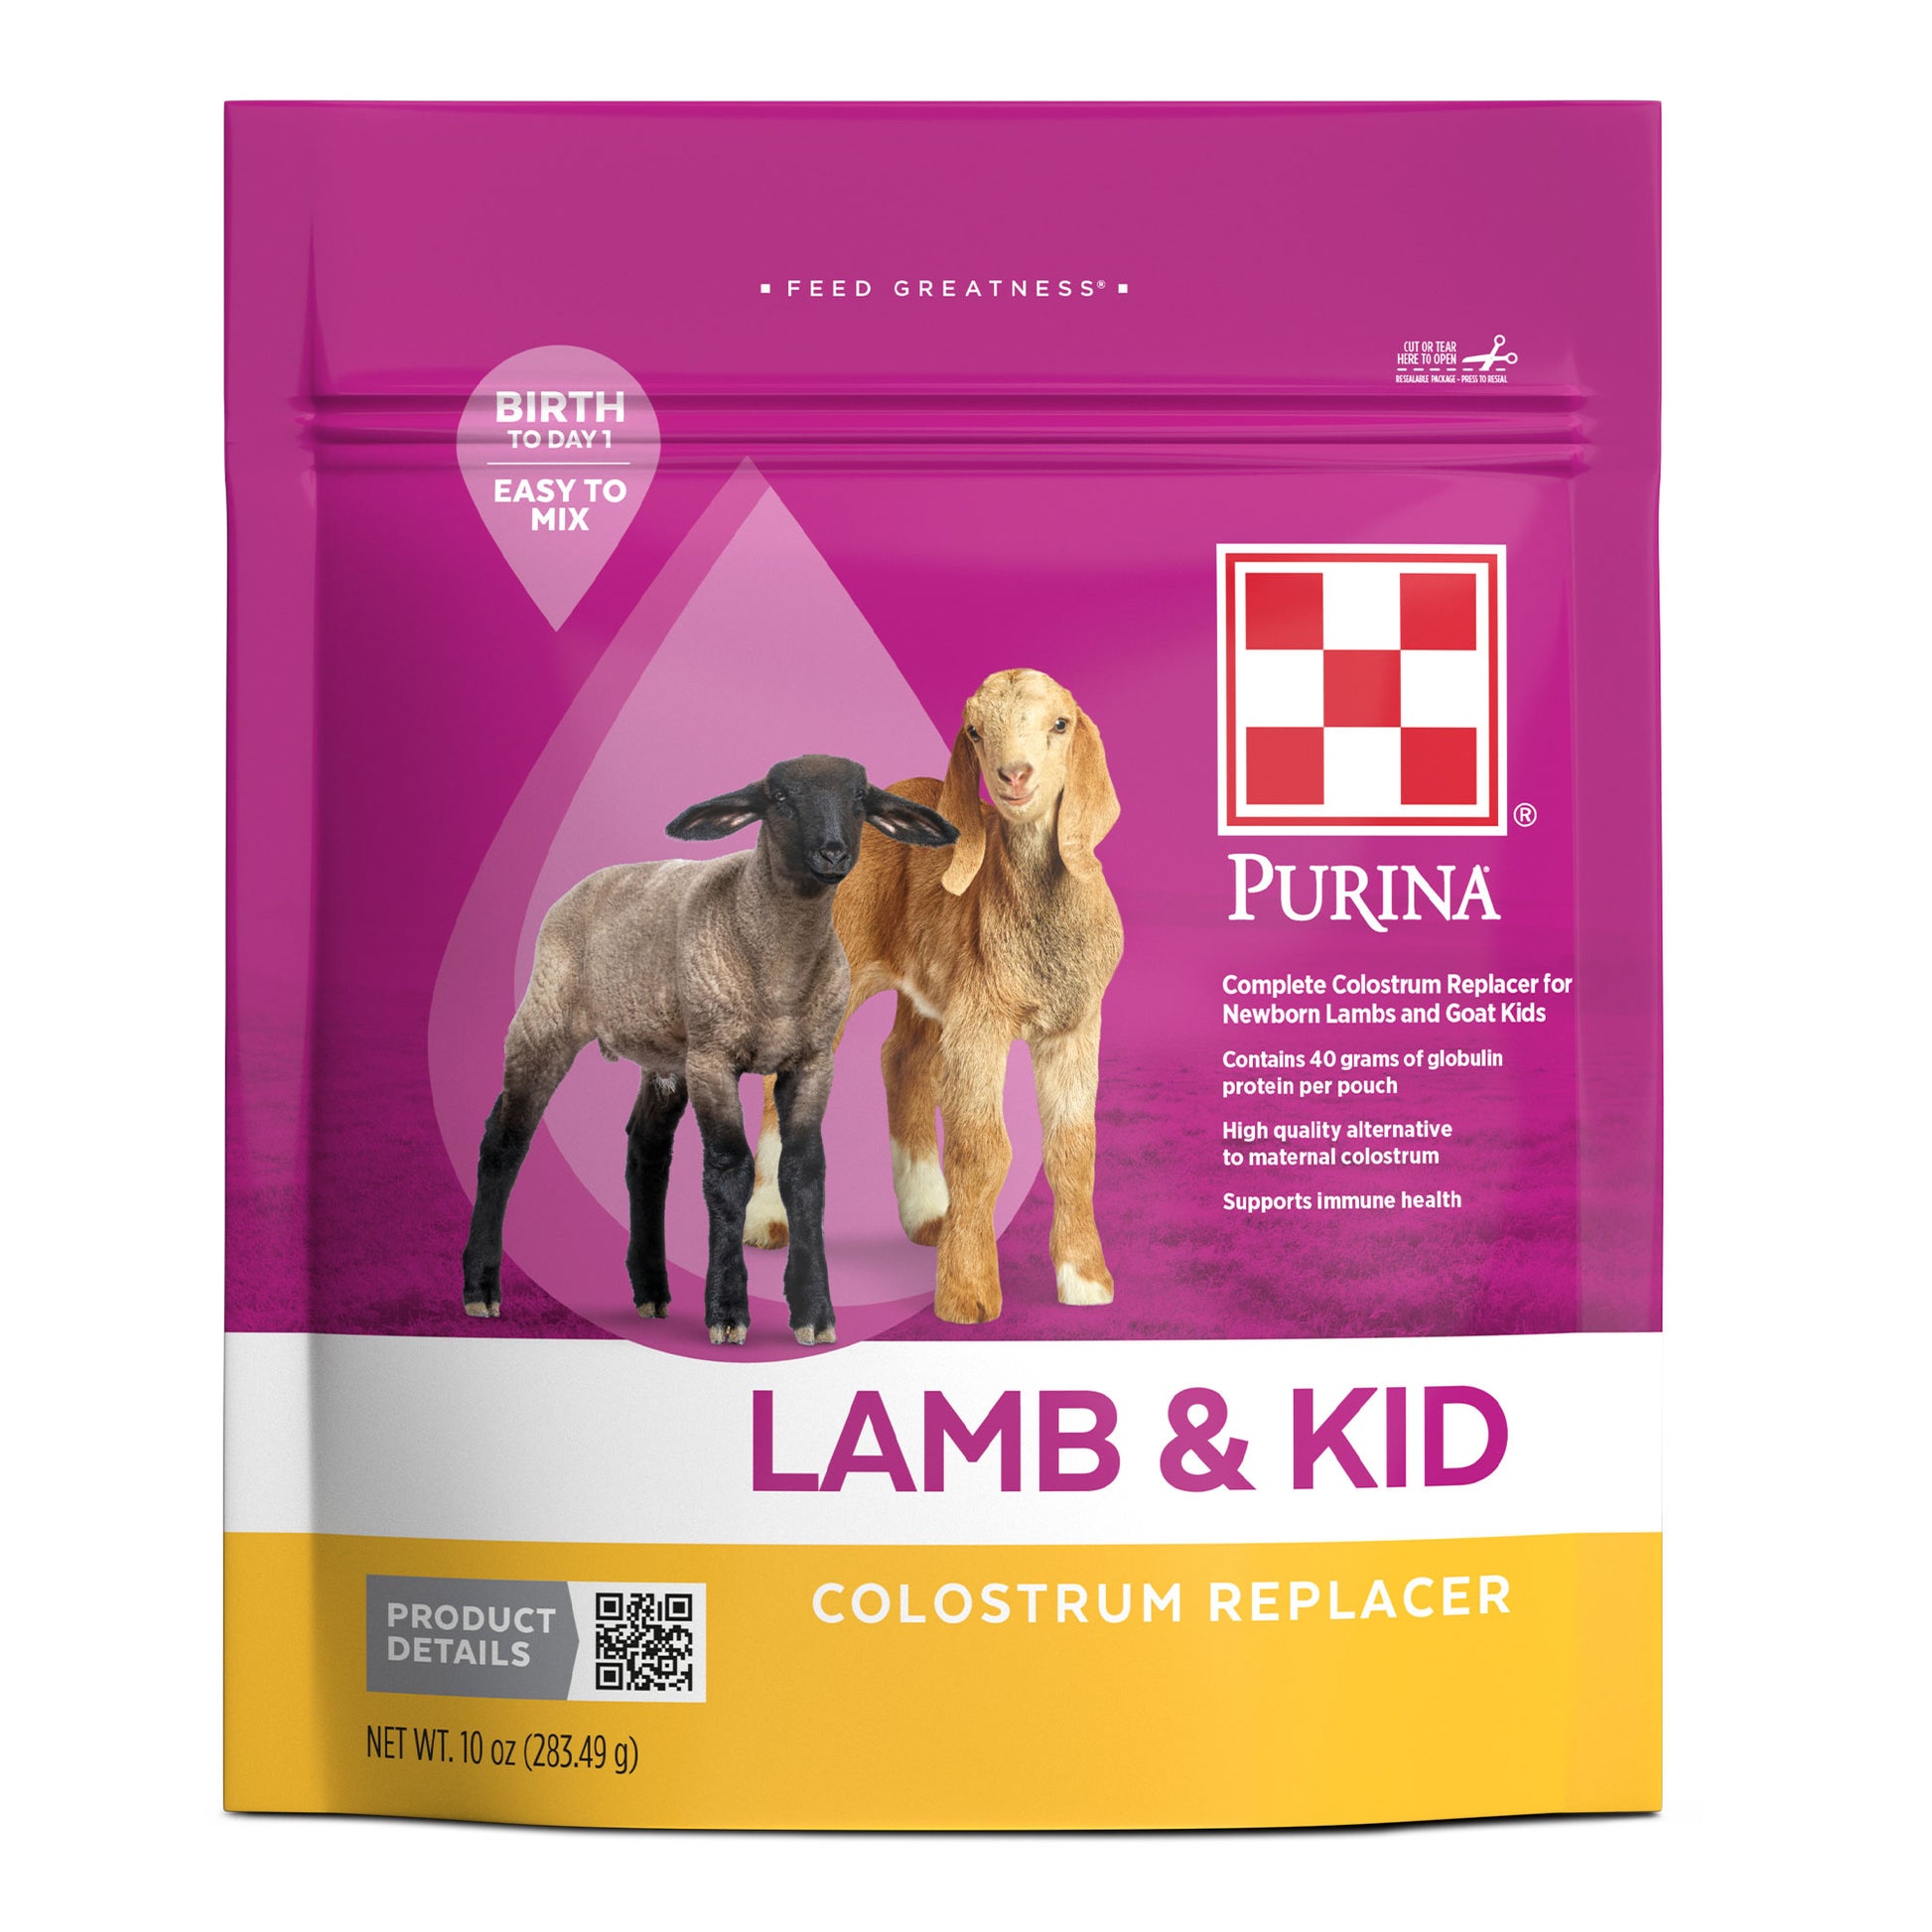  Lamb and Kid Colostrum Replacer 10 oz pouch